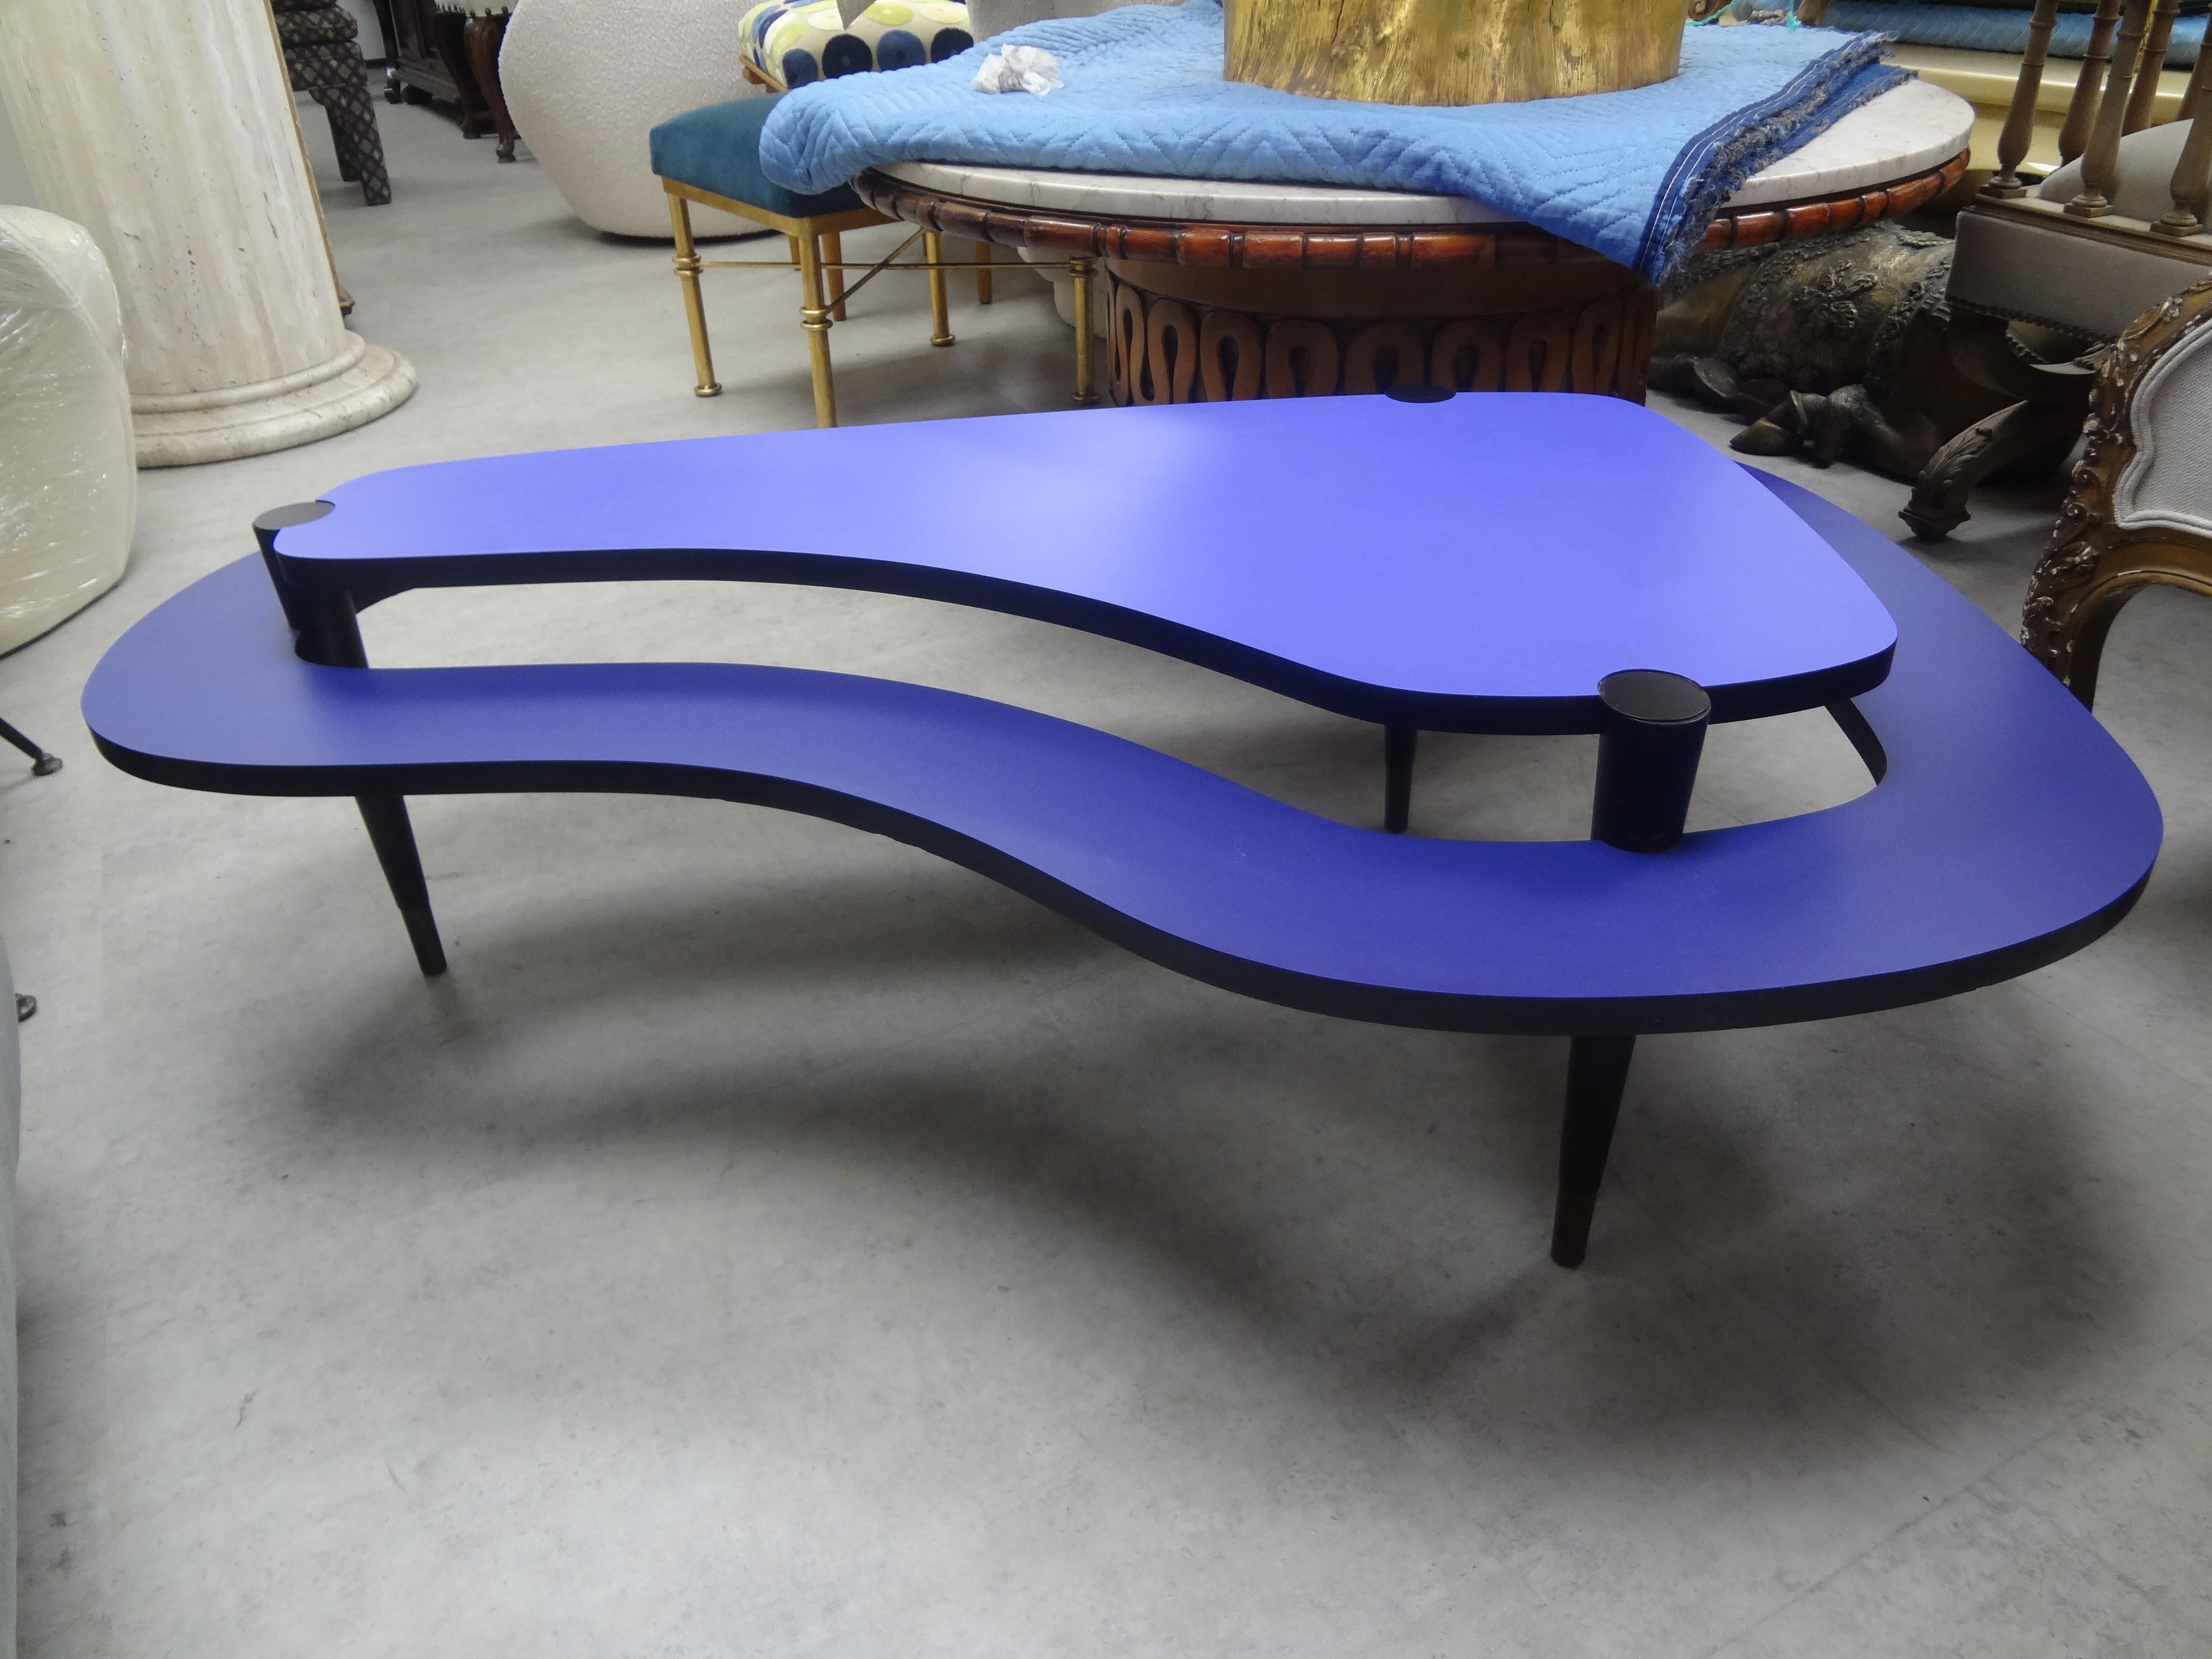 Postmodern laminated two tiered kidney shaped coffee table. This stunning post modern laminate cocktail table or coffee table was executed in fantastic purple and lavender shades with tapered legs and brass sabots.